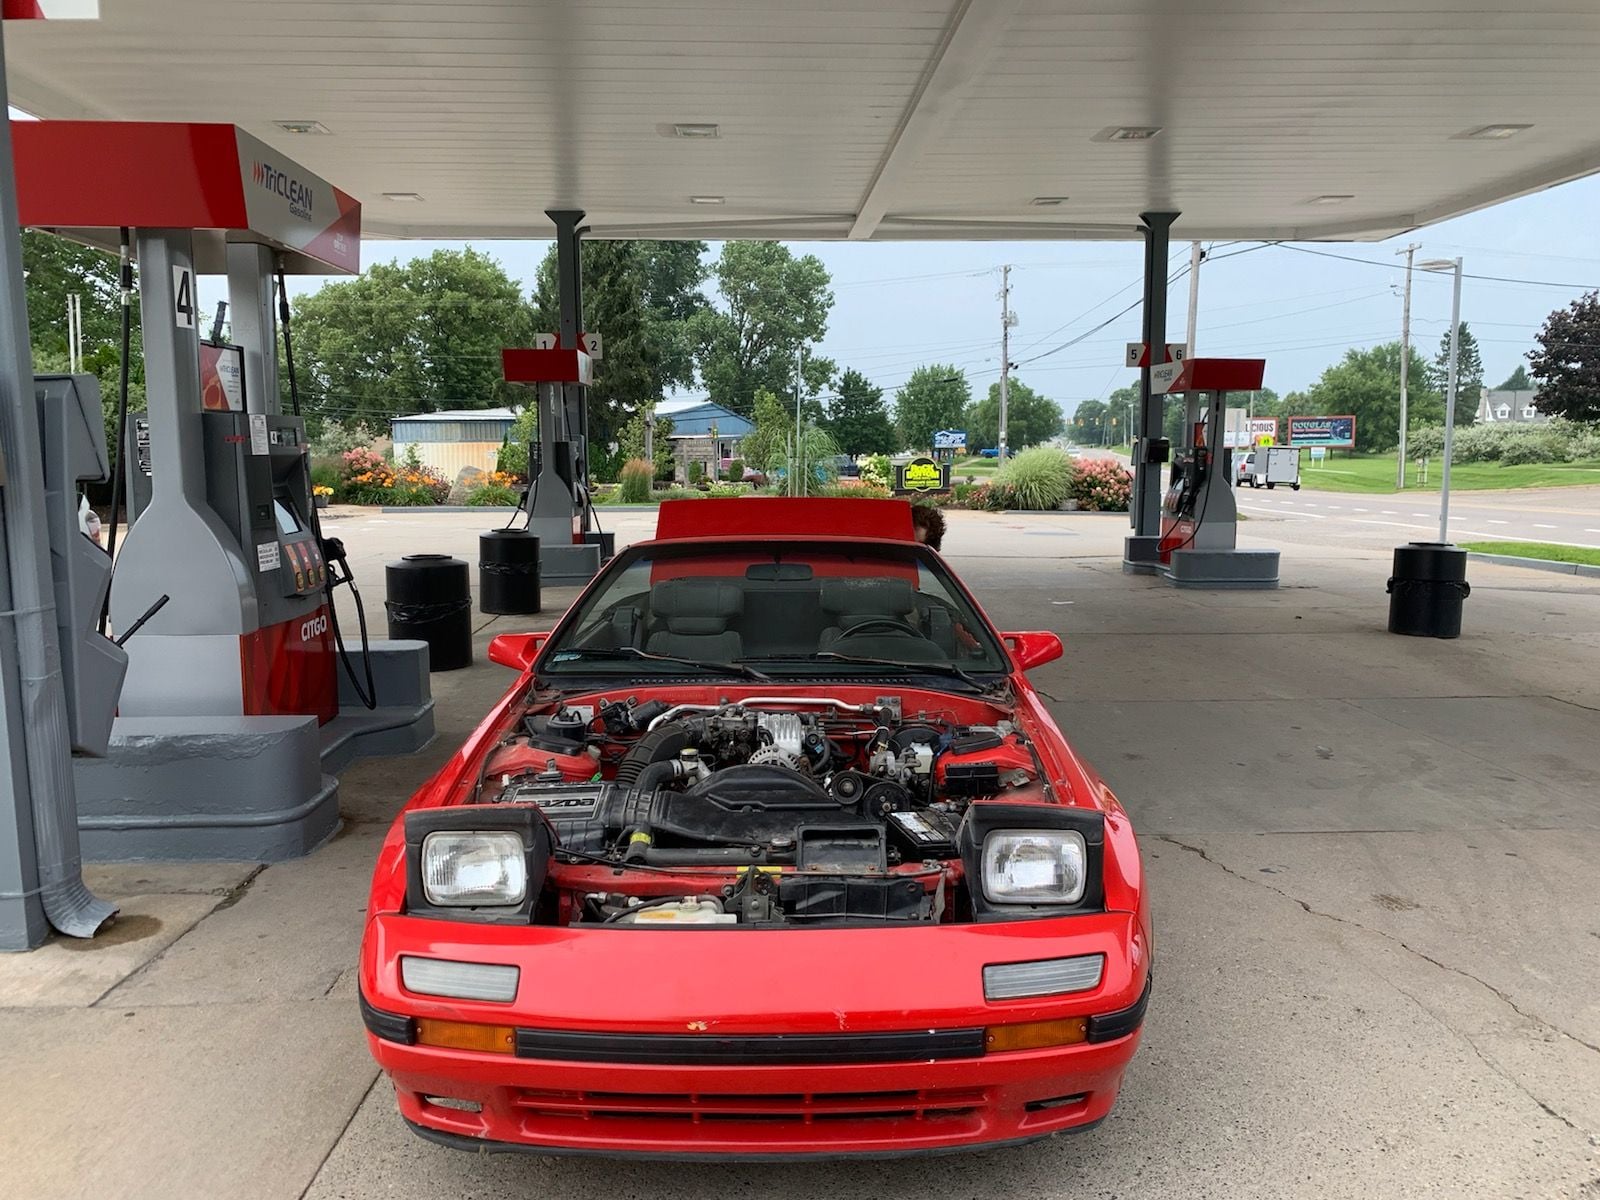 1988 Mazda RX-7 - 1988 RX-7 Vert - Used - VIN JM1FC3518J0101566 - 99,000 Miles - Other - 2WD - Manual - Convertible - Red - Milford, MI 48381, United States